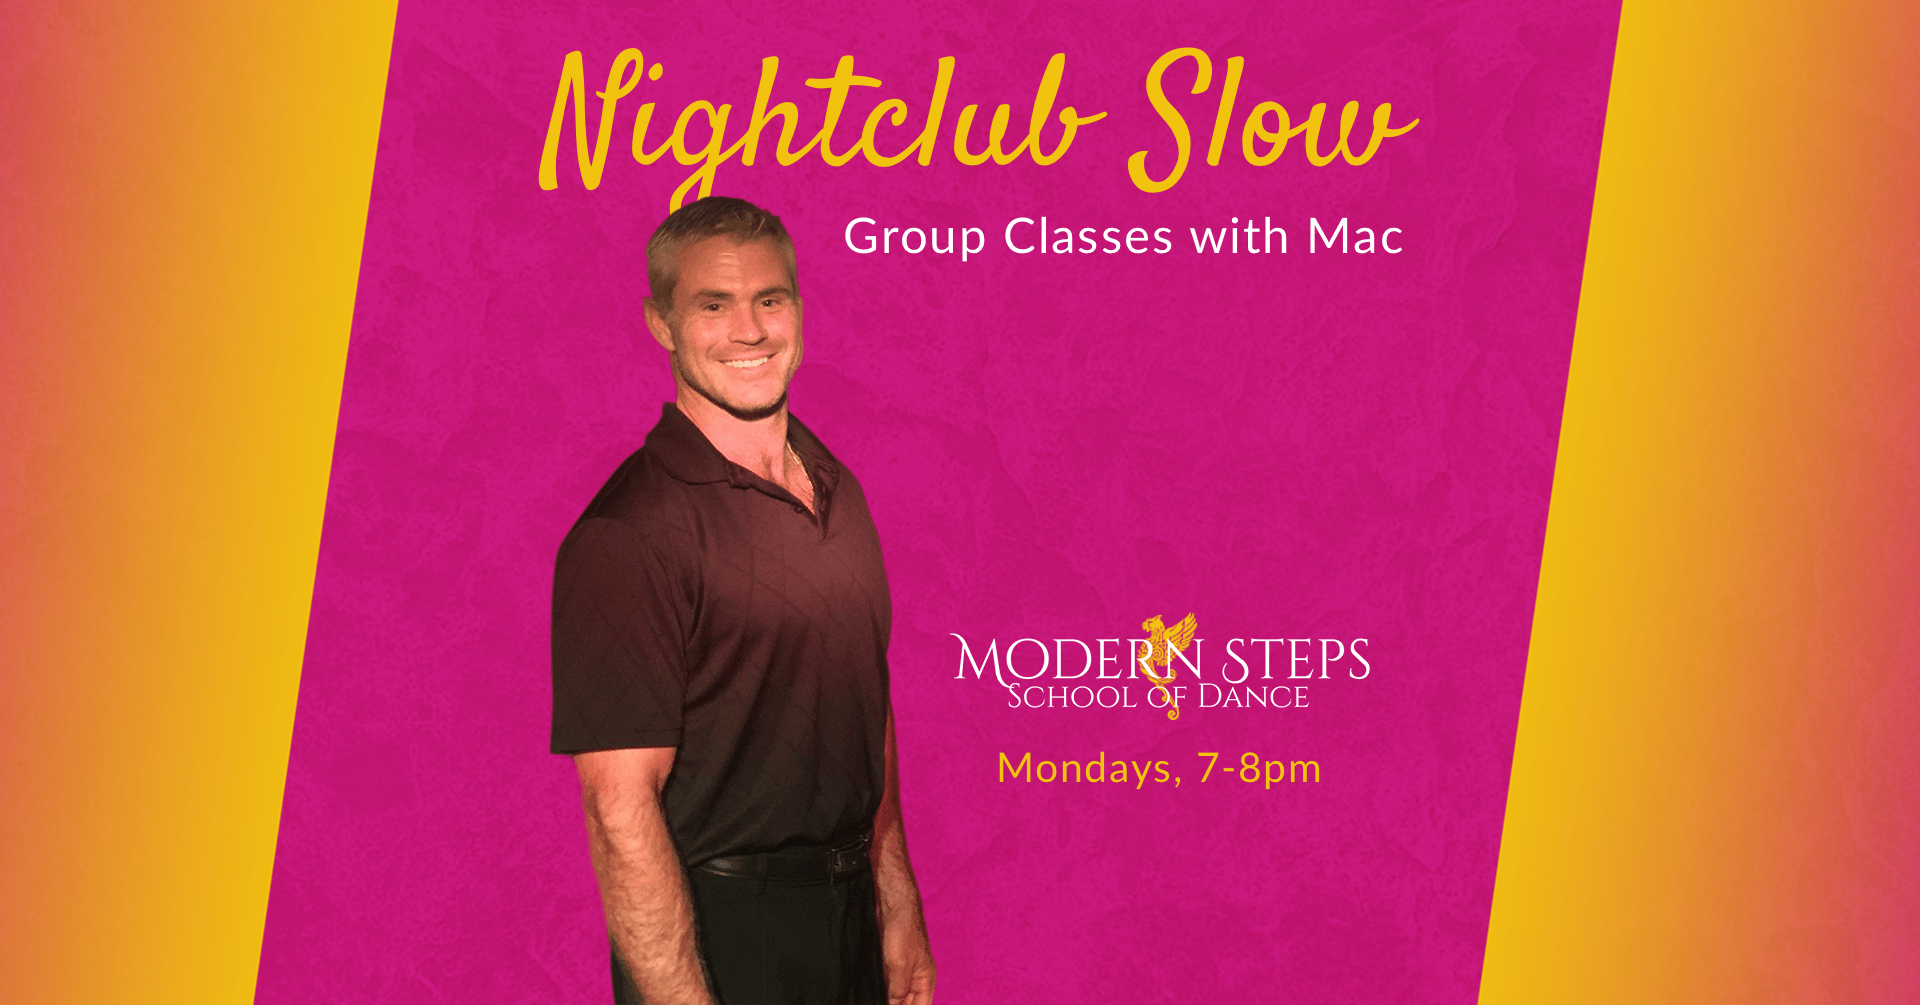 Nightclub Slow group dance classes with Mac at Modern Steps Dance Studio in Naples Florida